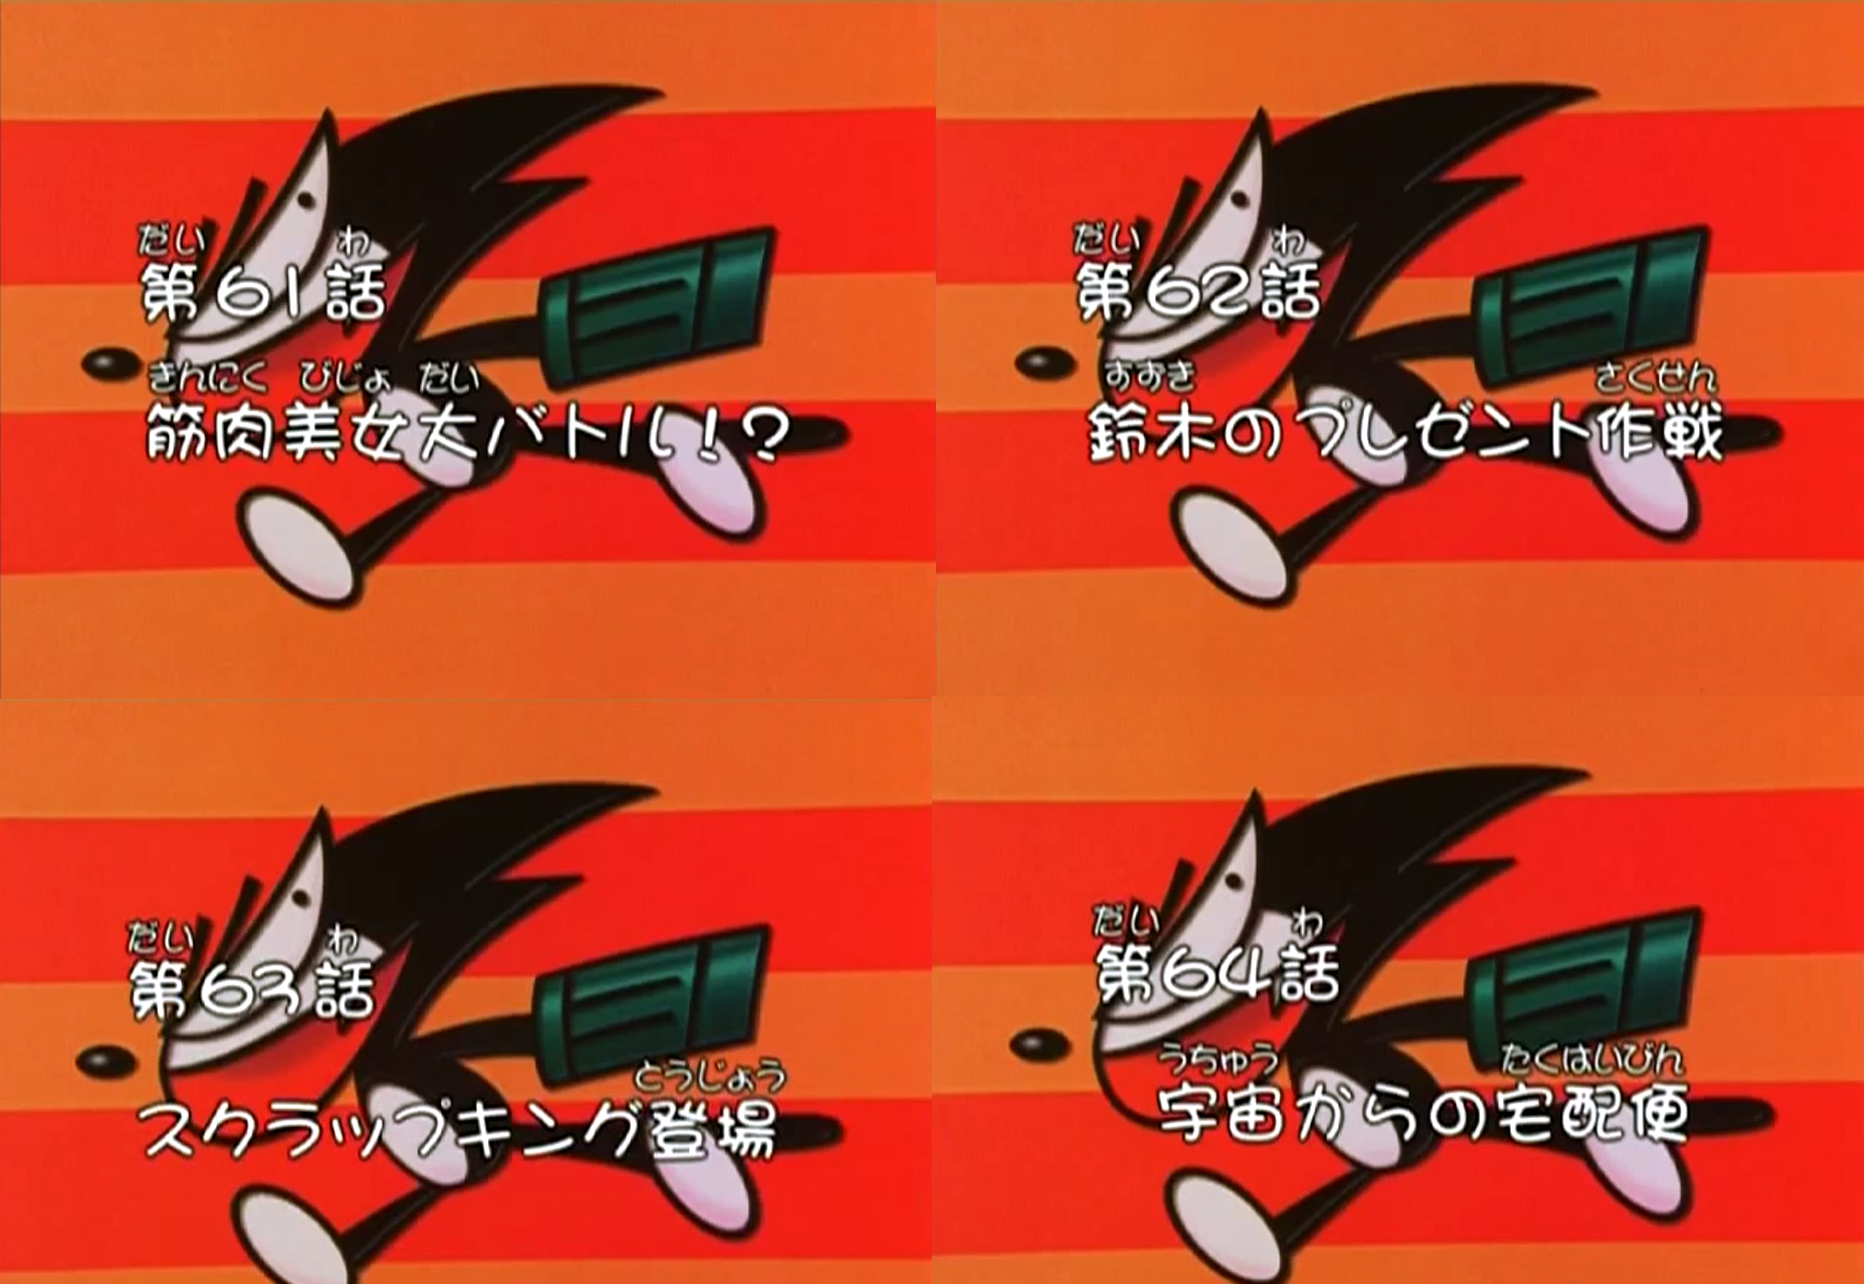 The Title Cards For the Episodes.png